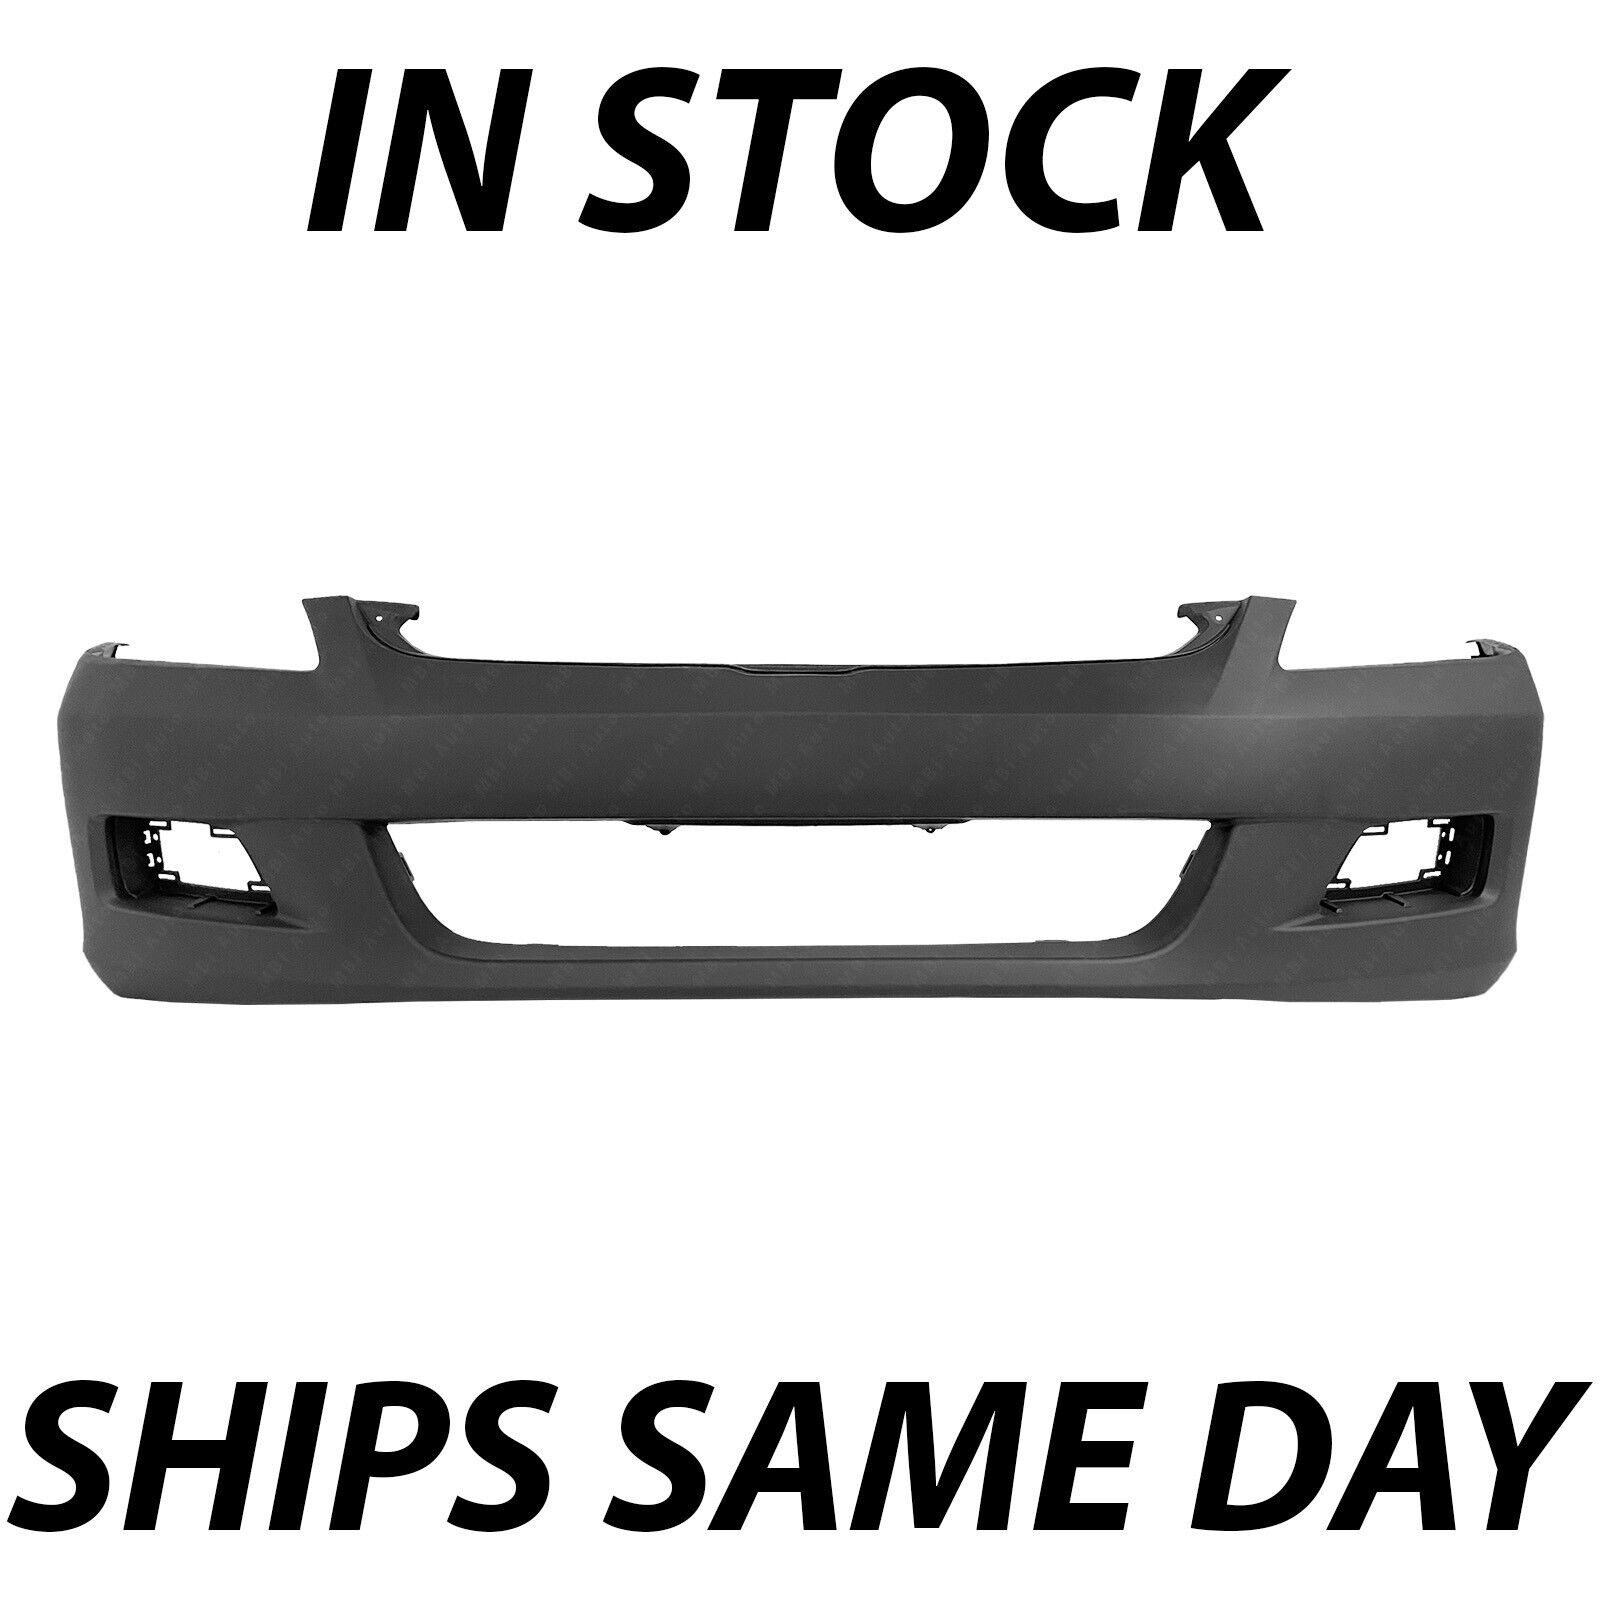 NEW Primered - Front Bumper Cover Replacement for 2006 2007 Honda Accord Sedan